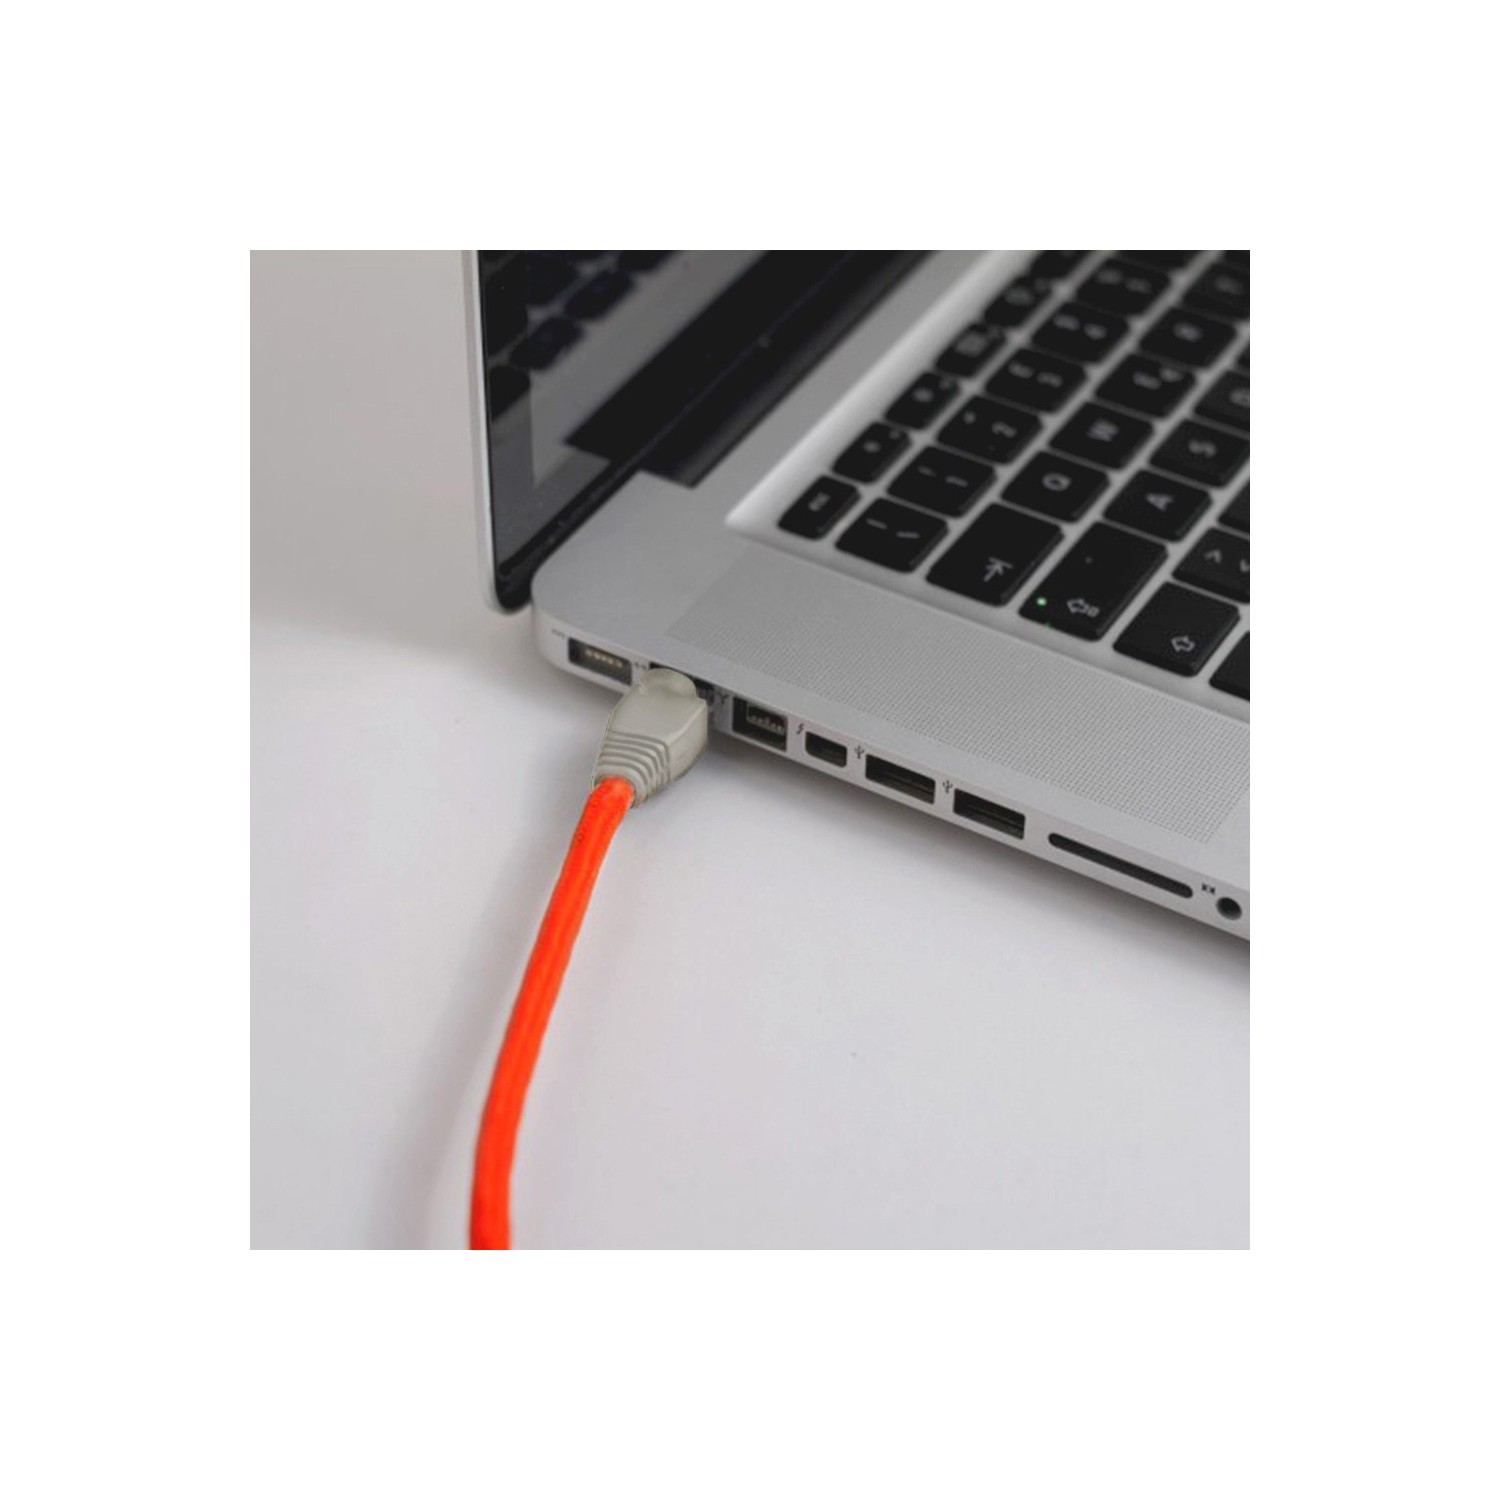 LAN Ethernet Cable Cat 5e with RJ45 plugs - Rayon Fabric RF15 Neon Orange